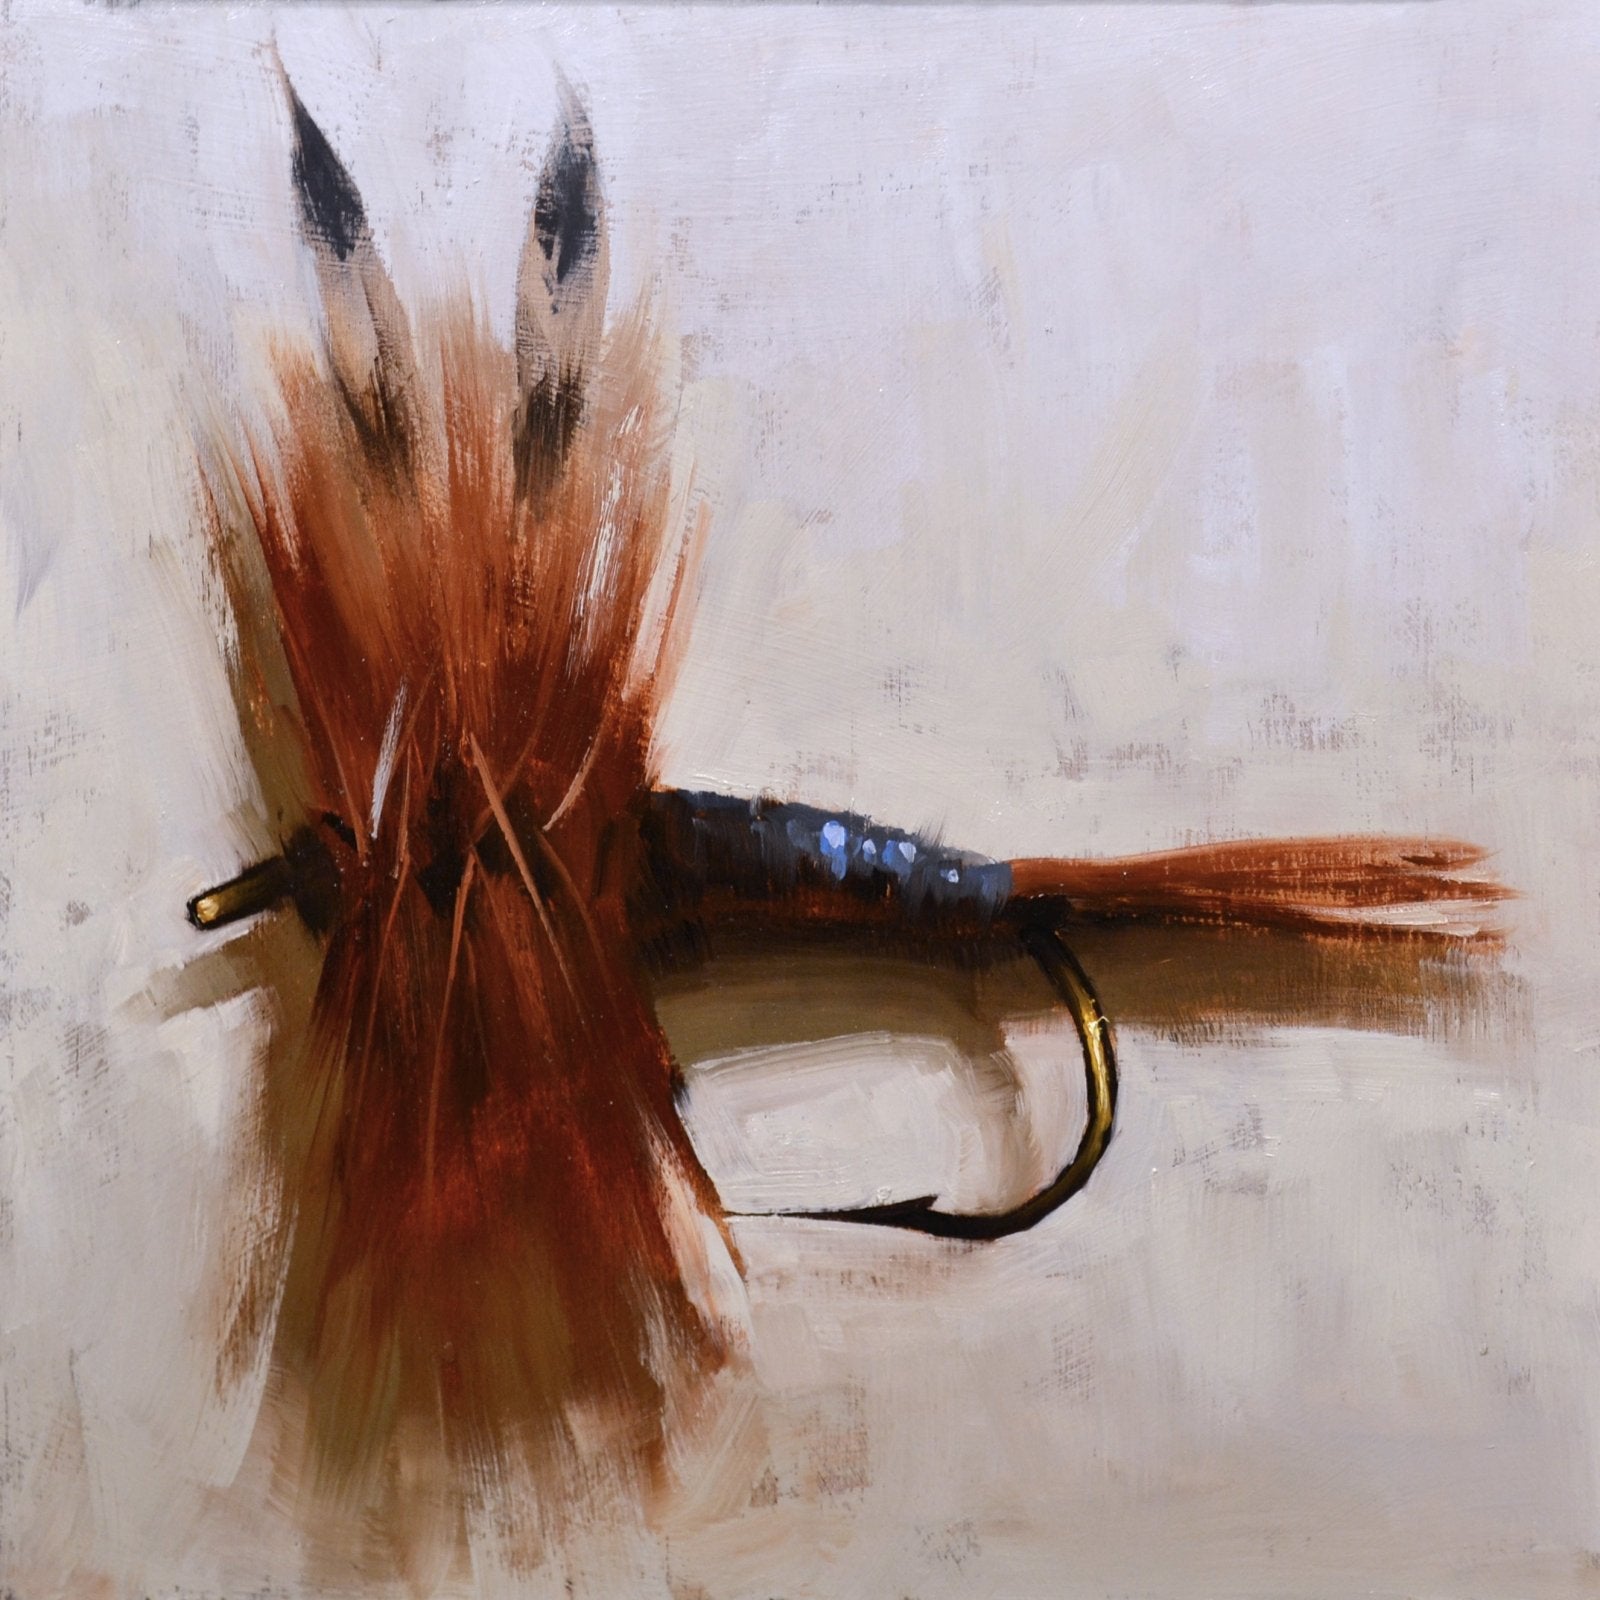 Adam's Fly by Marc Anderson at LePrince Galleries